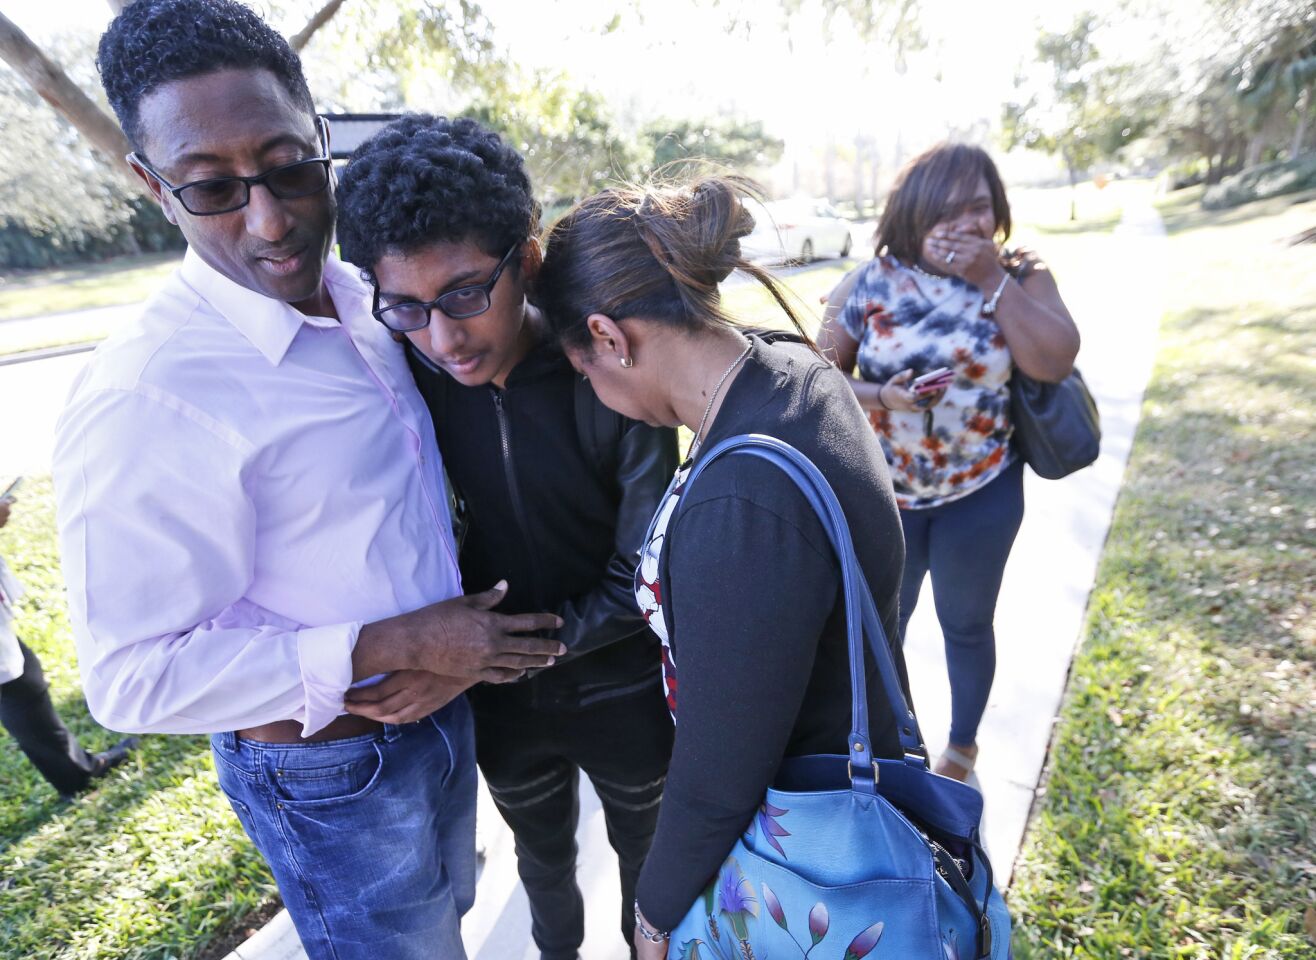 Family members embrace a student who was released from the school. A shooting at the school sent students rushing into the streets as SWAT team members swarmed in and locked down the building.